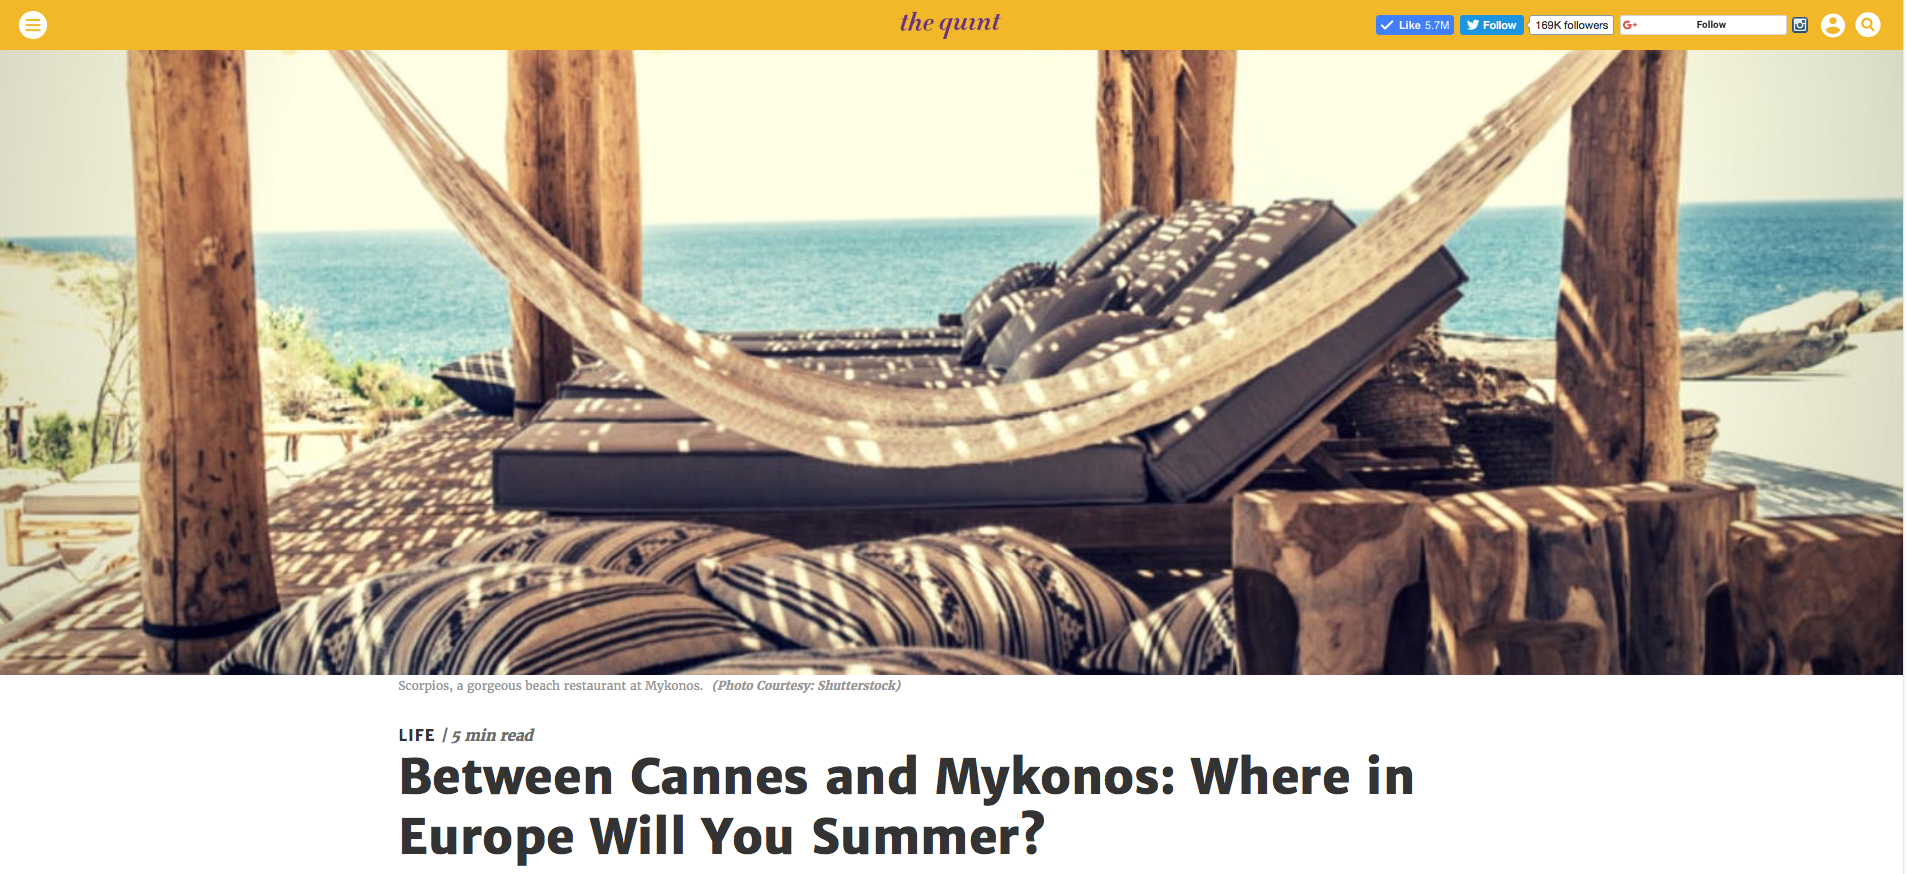 The Quint - Between Cannes and Mykonos: Where in Europe Will You Summer?